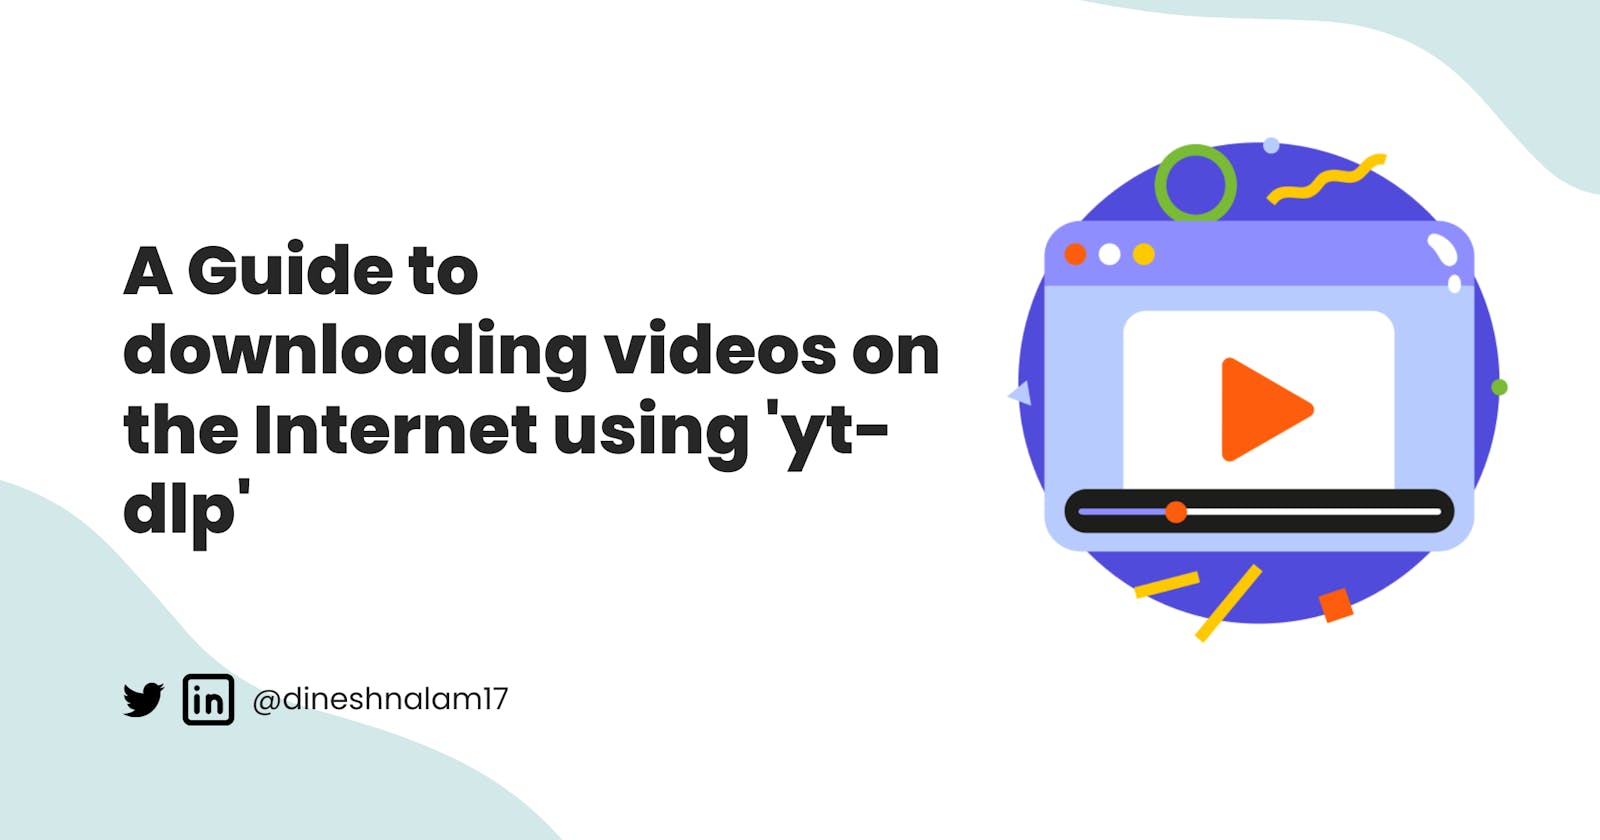 A Beginner’s guide to download any (almost) video on the internet.